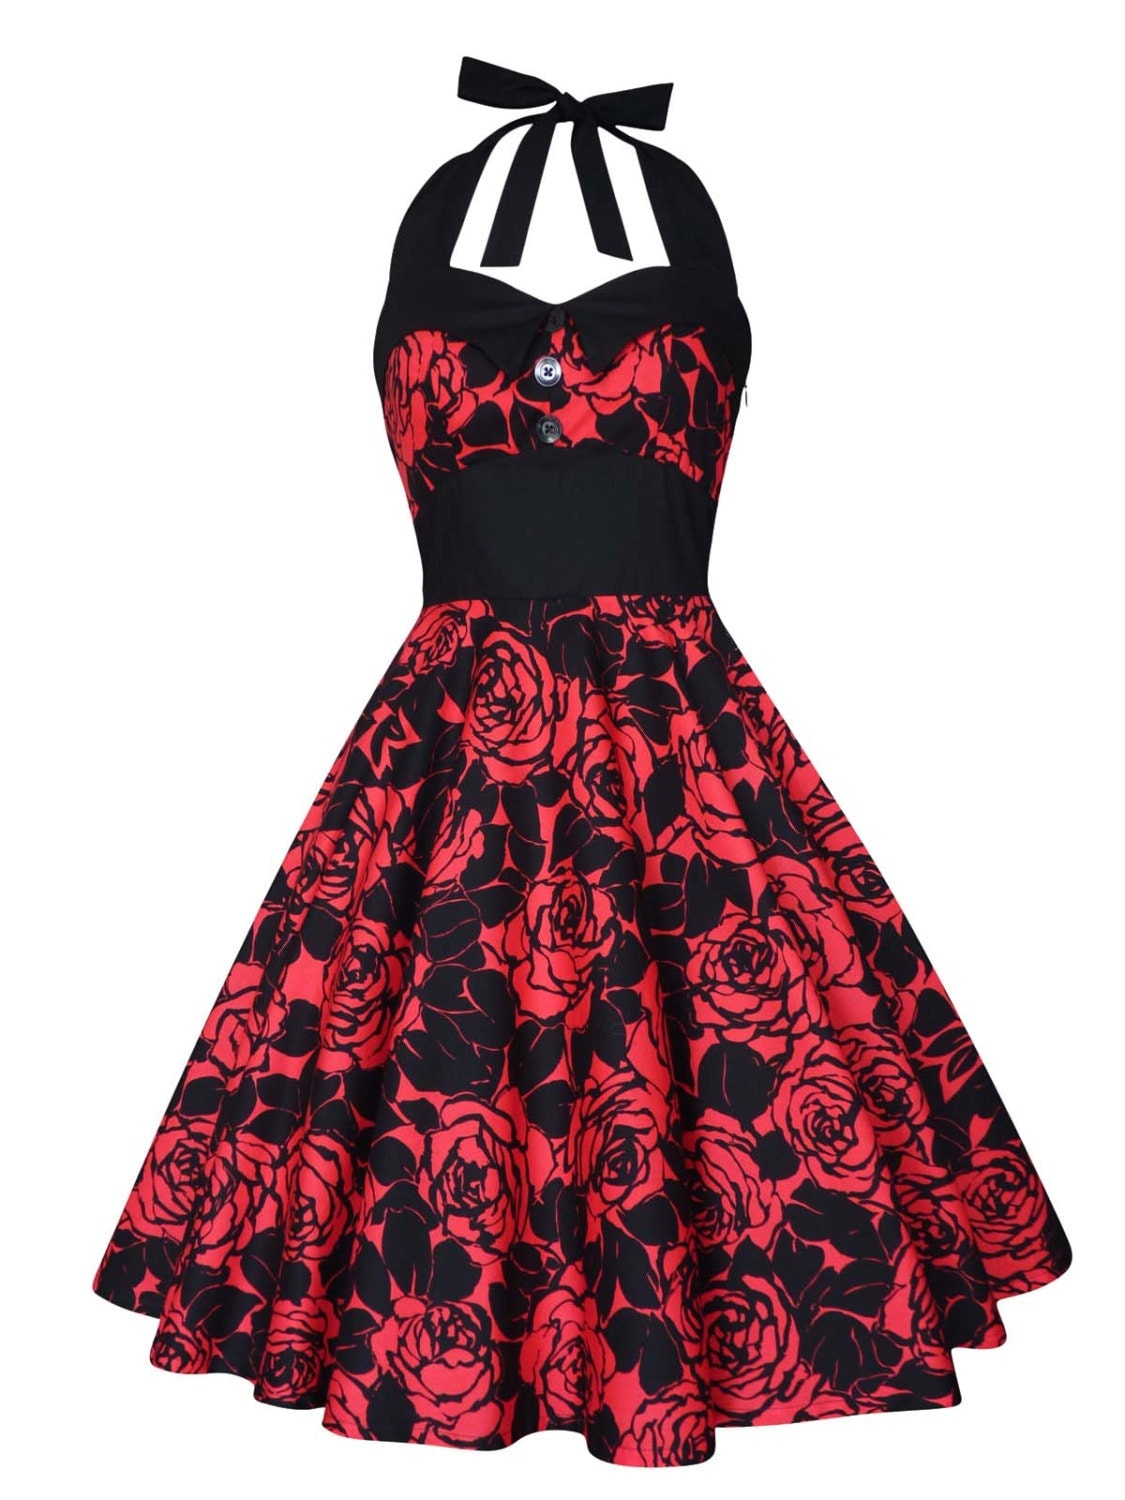 Lady Mayra Ashley Red Roses Dress Vintage Rockabilly Pin Up 1950s Retro Style Gothic Lolita Steampunk Swing Prom Party Plus Size Clothing